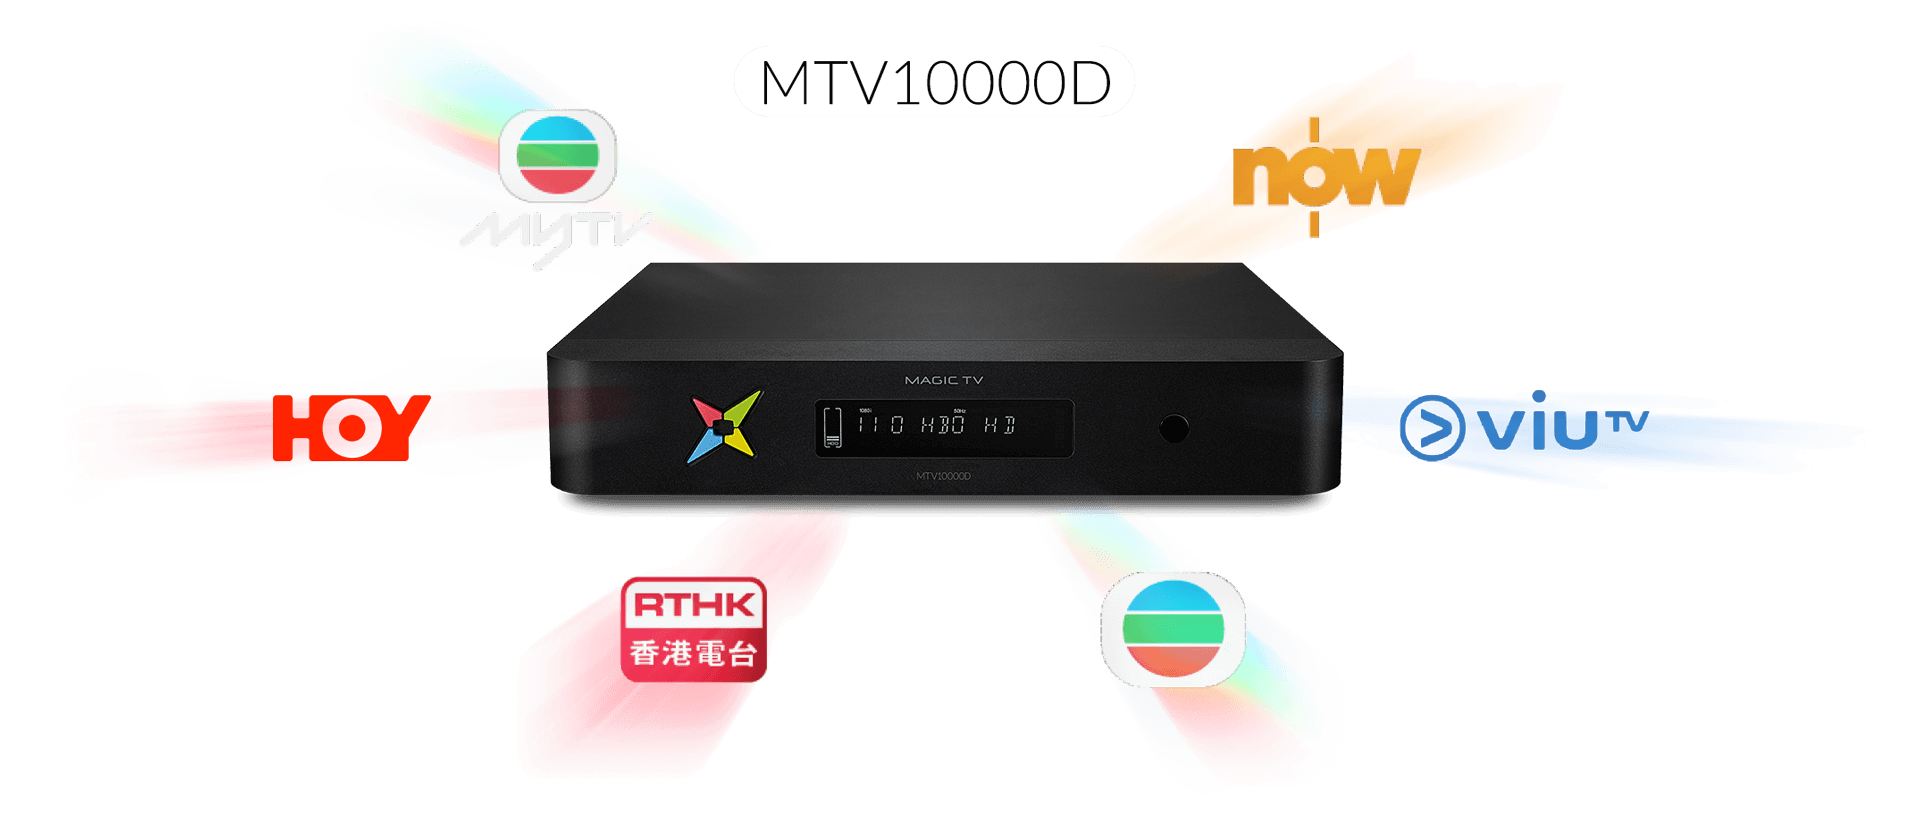 Broadcast, Pay TV and on-demand channels - all in one system!